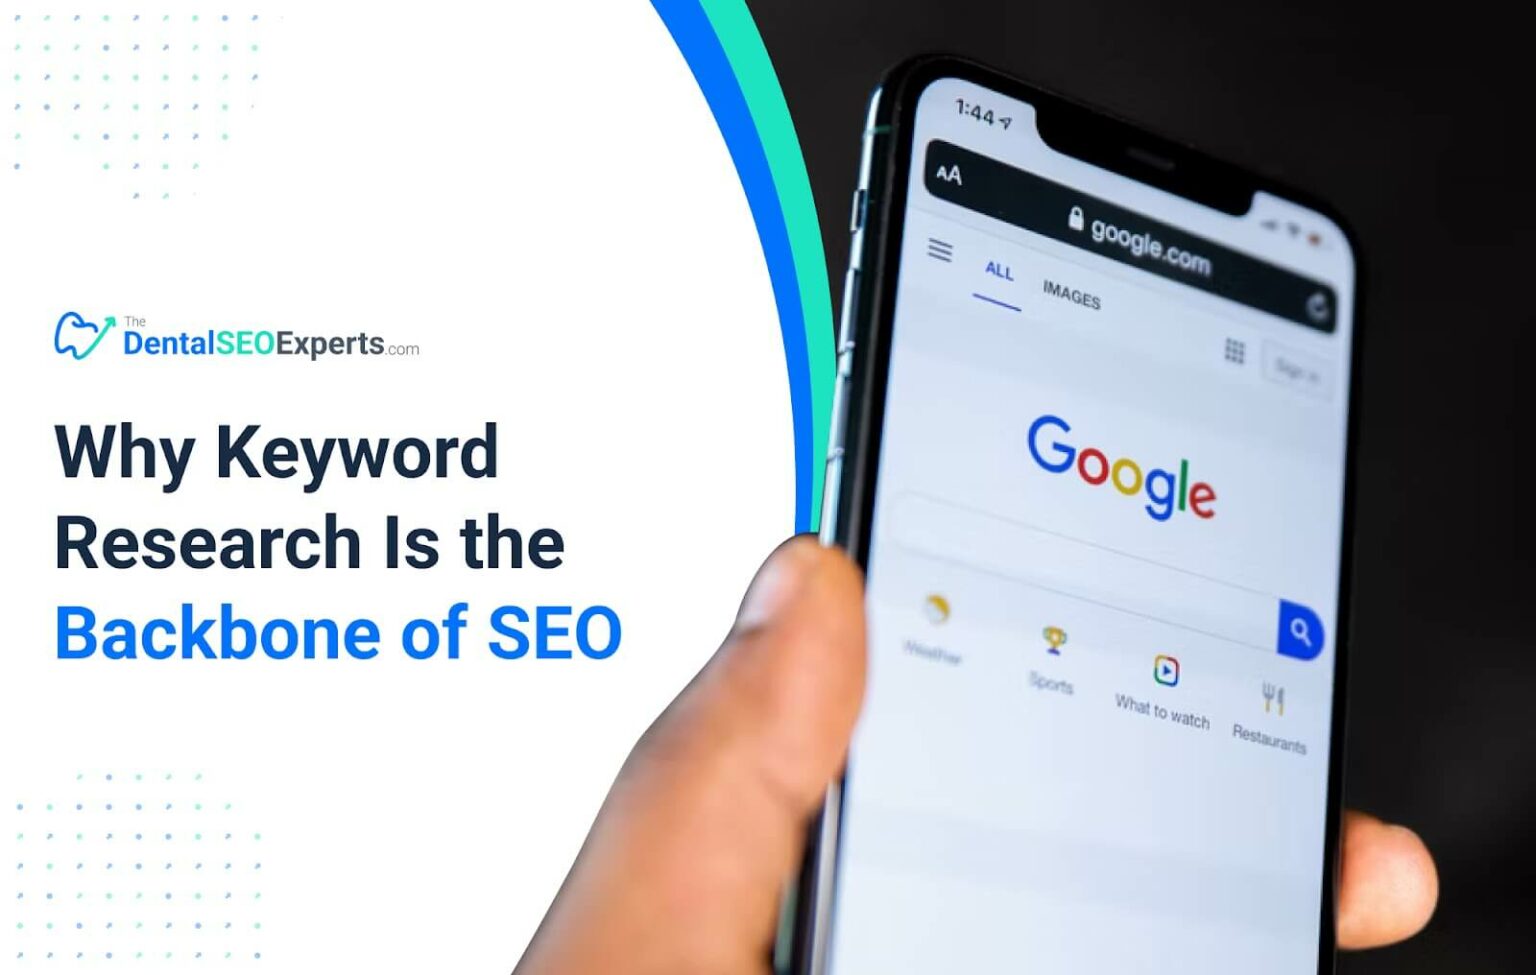 TheDentalSEOExperts - Why Keyword Research Is the Backbone of SEO